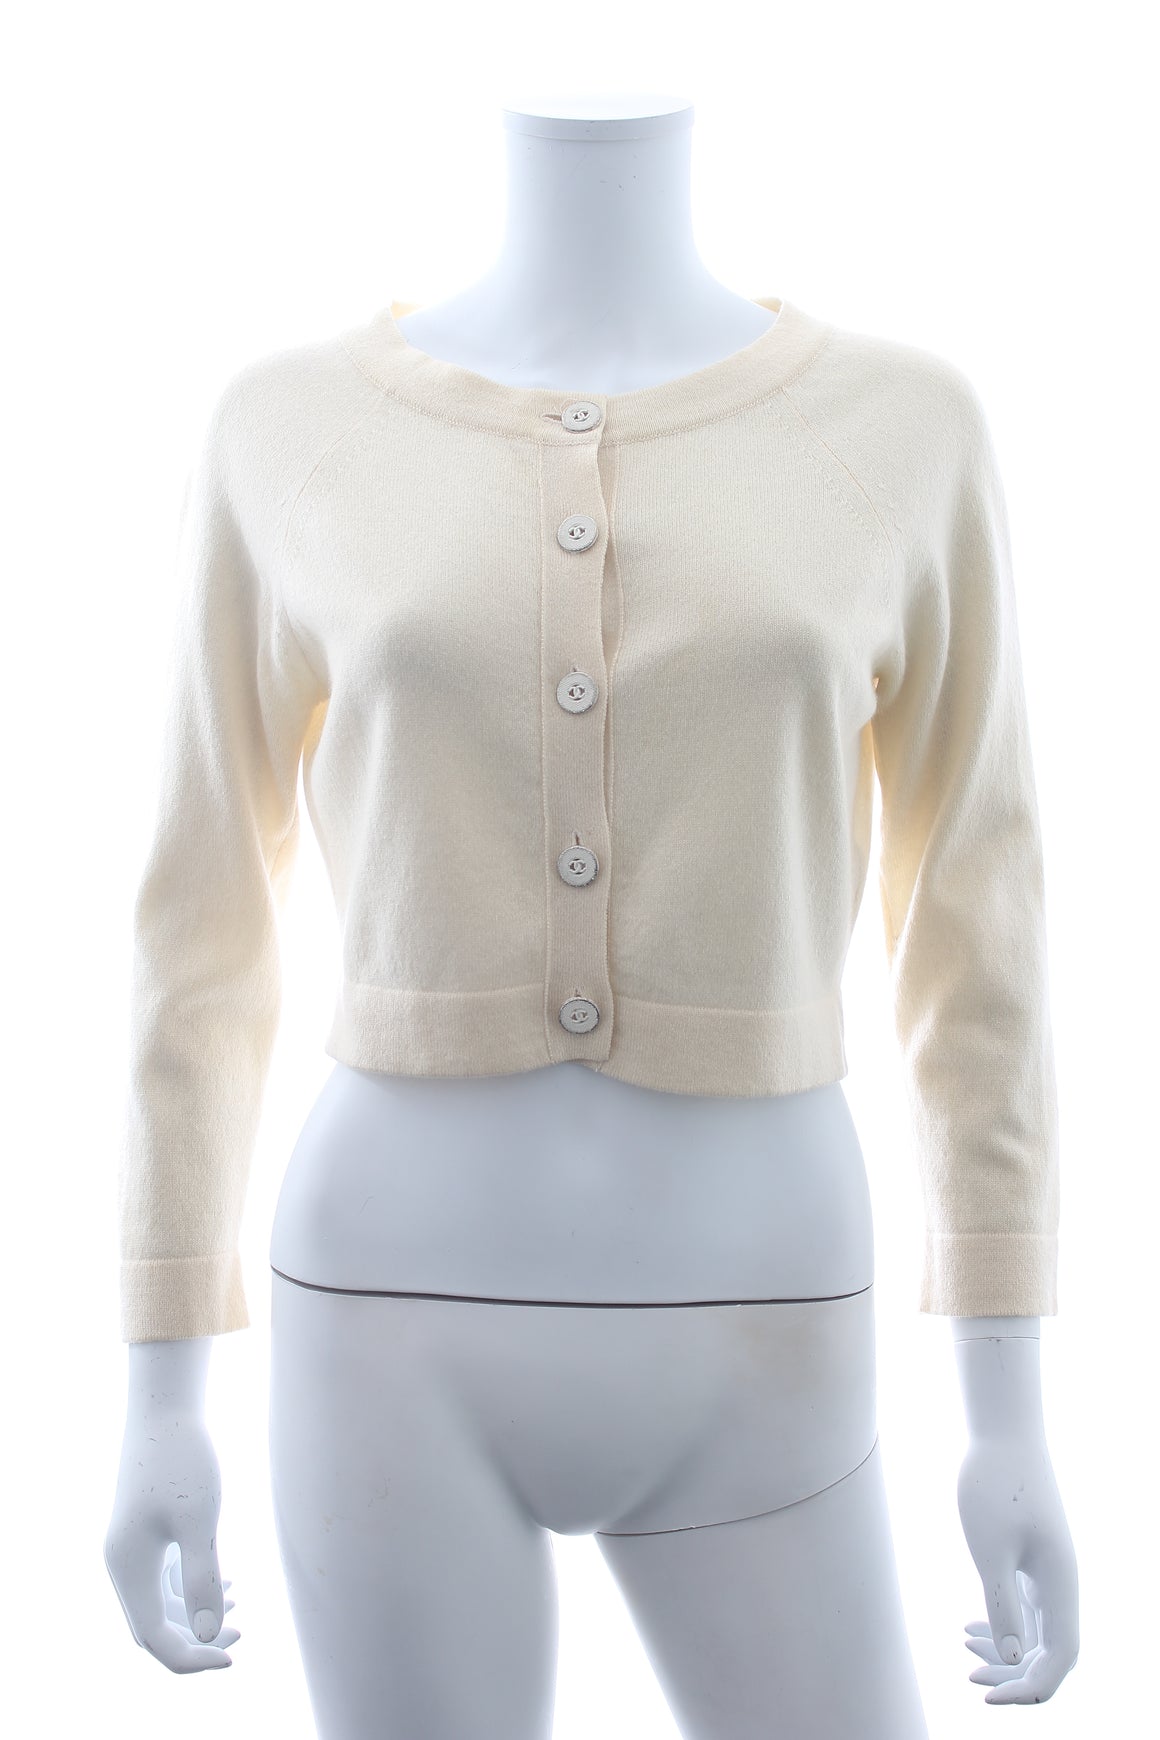 Chanel Cropped Cashmere Cardigan